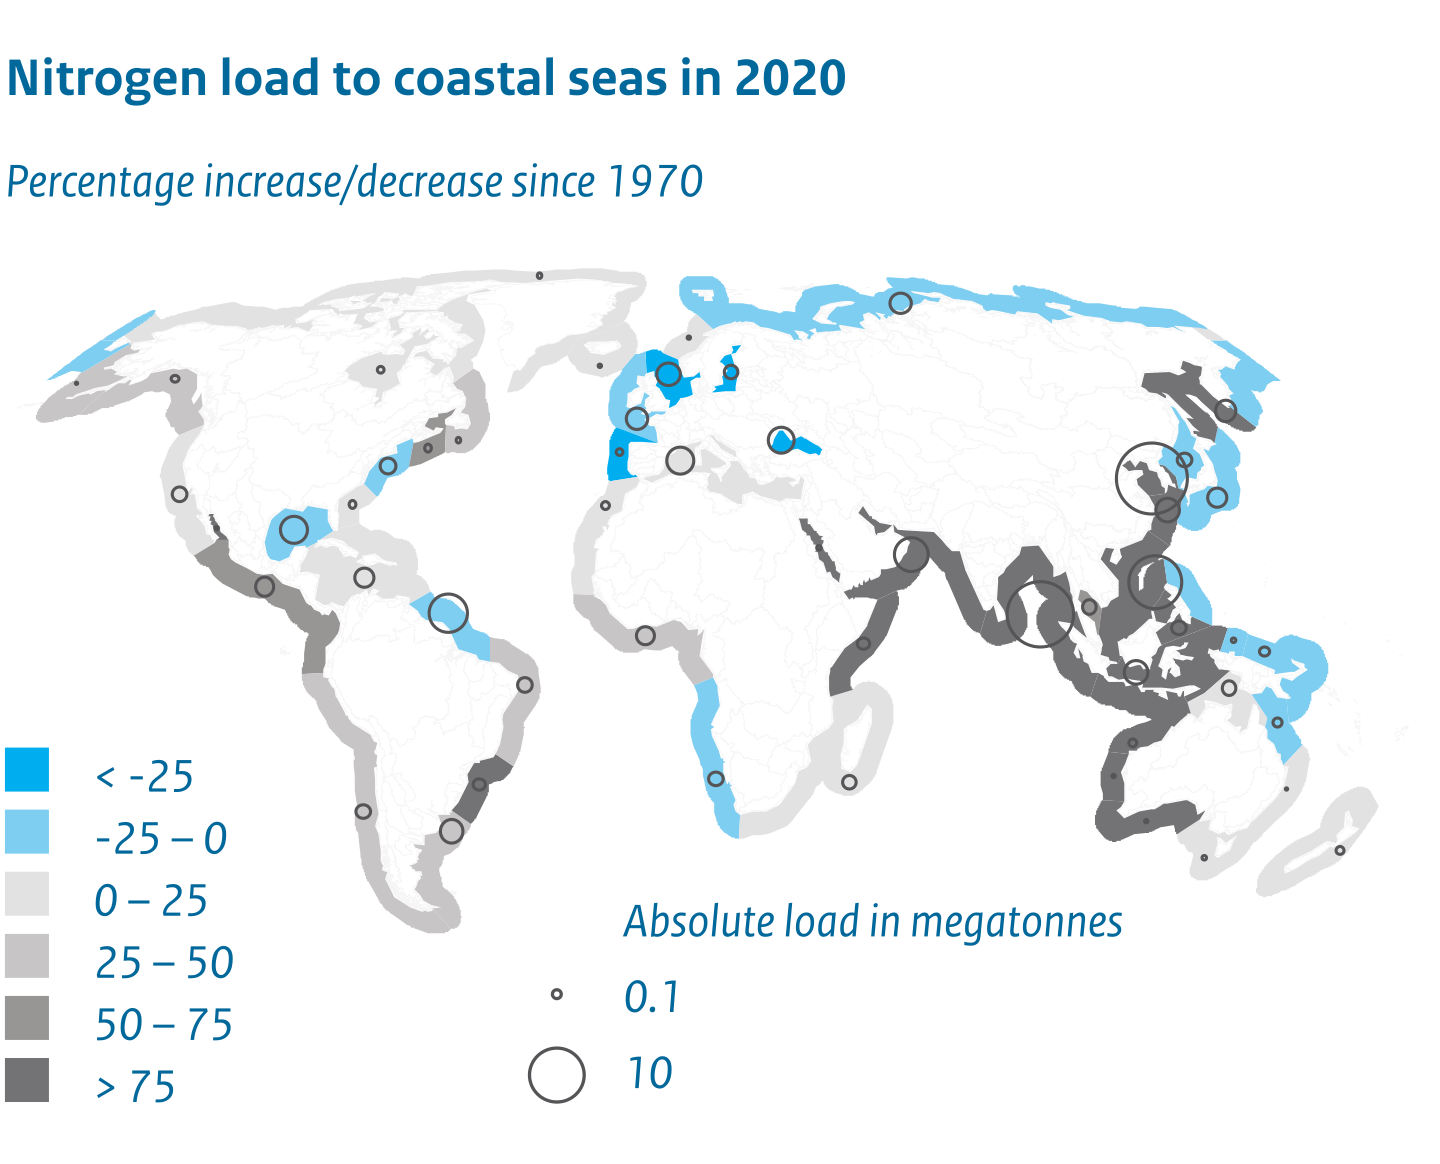 Nitrogen load to coastal seas has increased, between 1970 and 2020, by more than 75% in most of Asia and along the east coast of Africa and the west coast of Australia. It has increased by up to 50% in most of North and South America, Africa and the east coast of Australia. In Europe and Russia, however, nitrogen load to coastal seas has decreased by up to 25%.